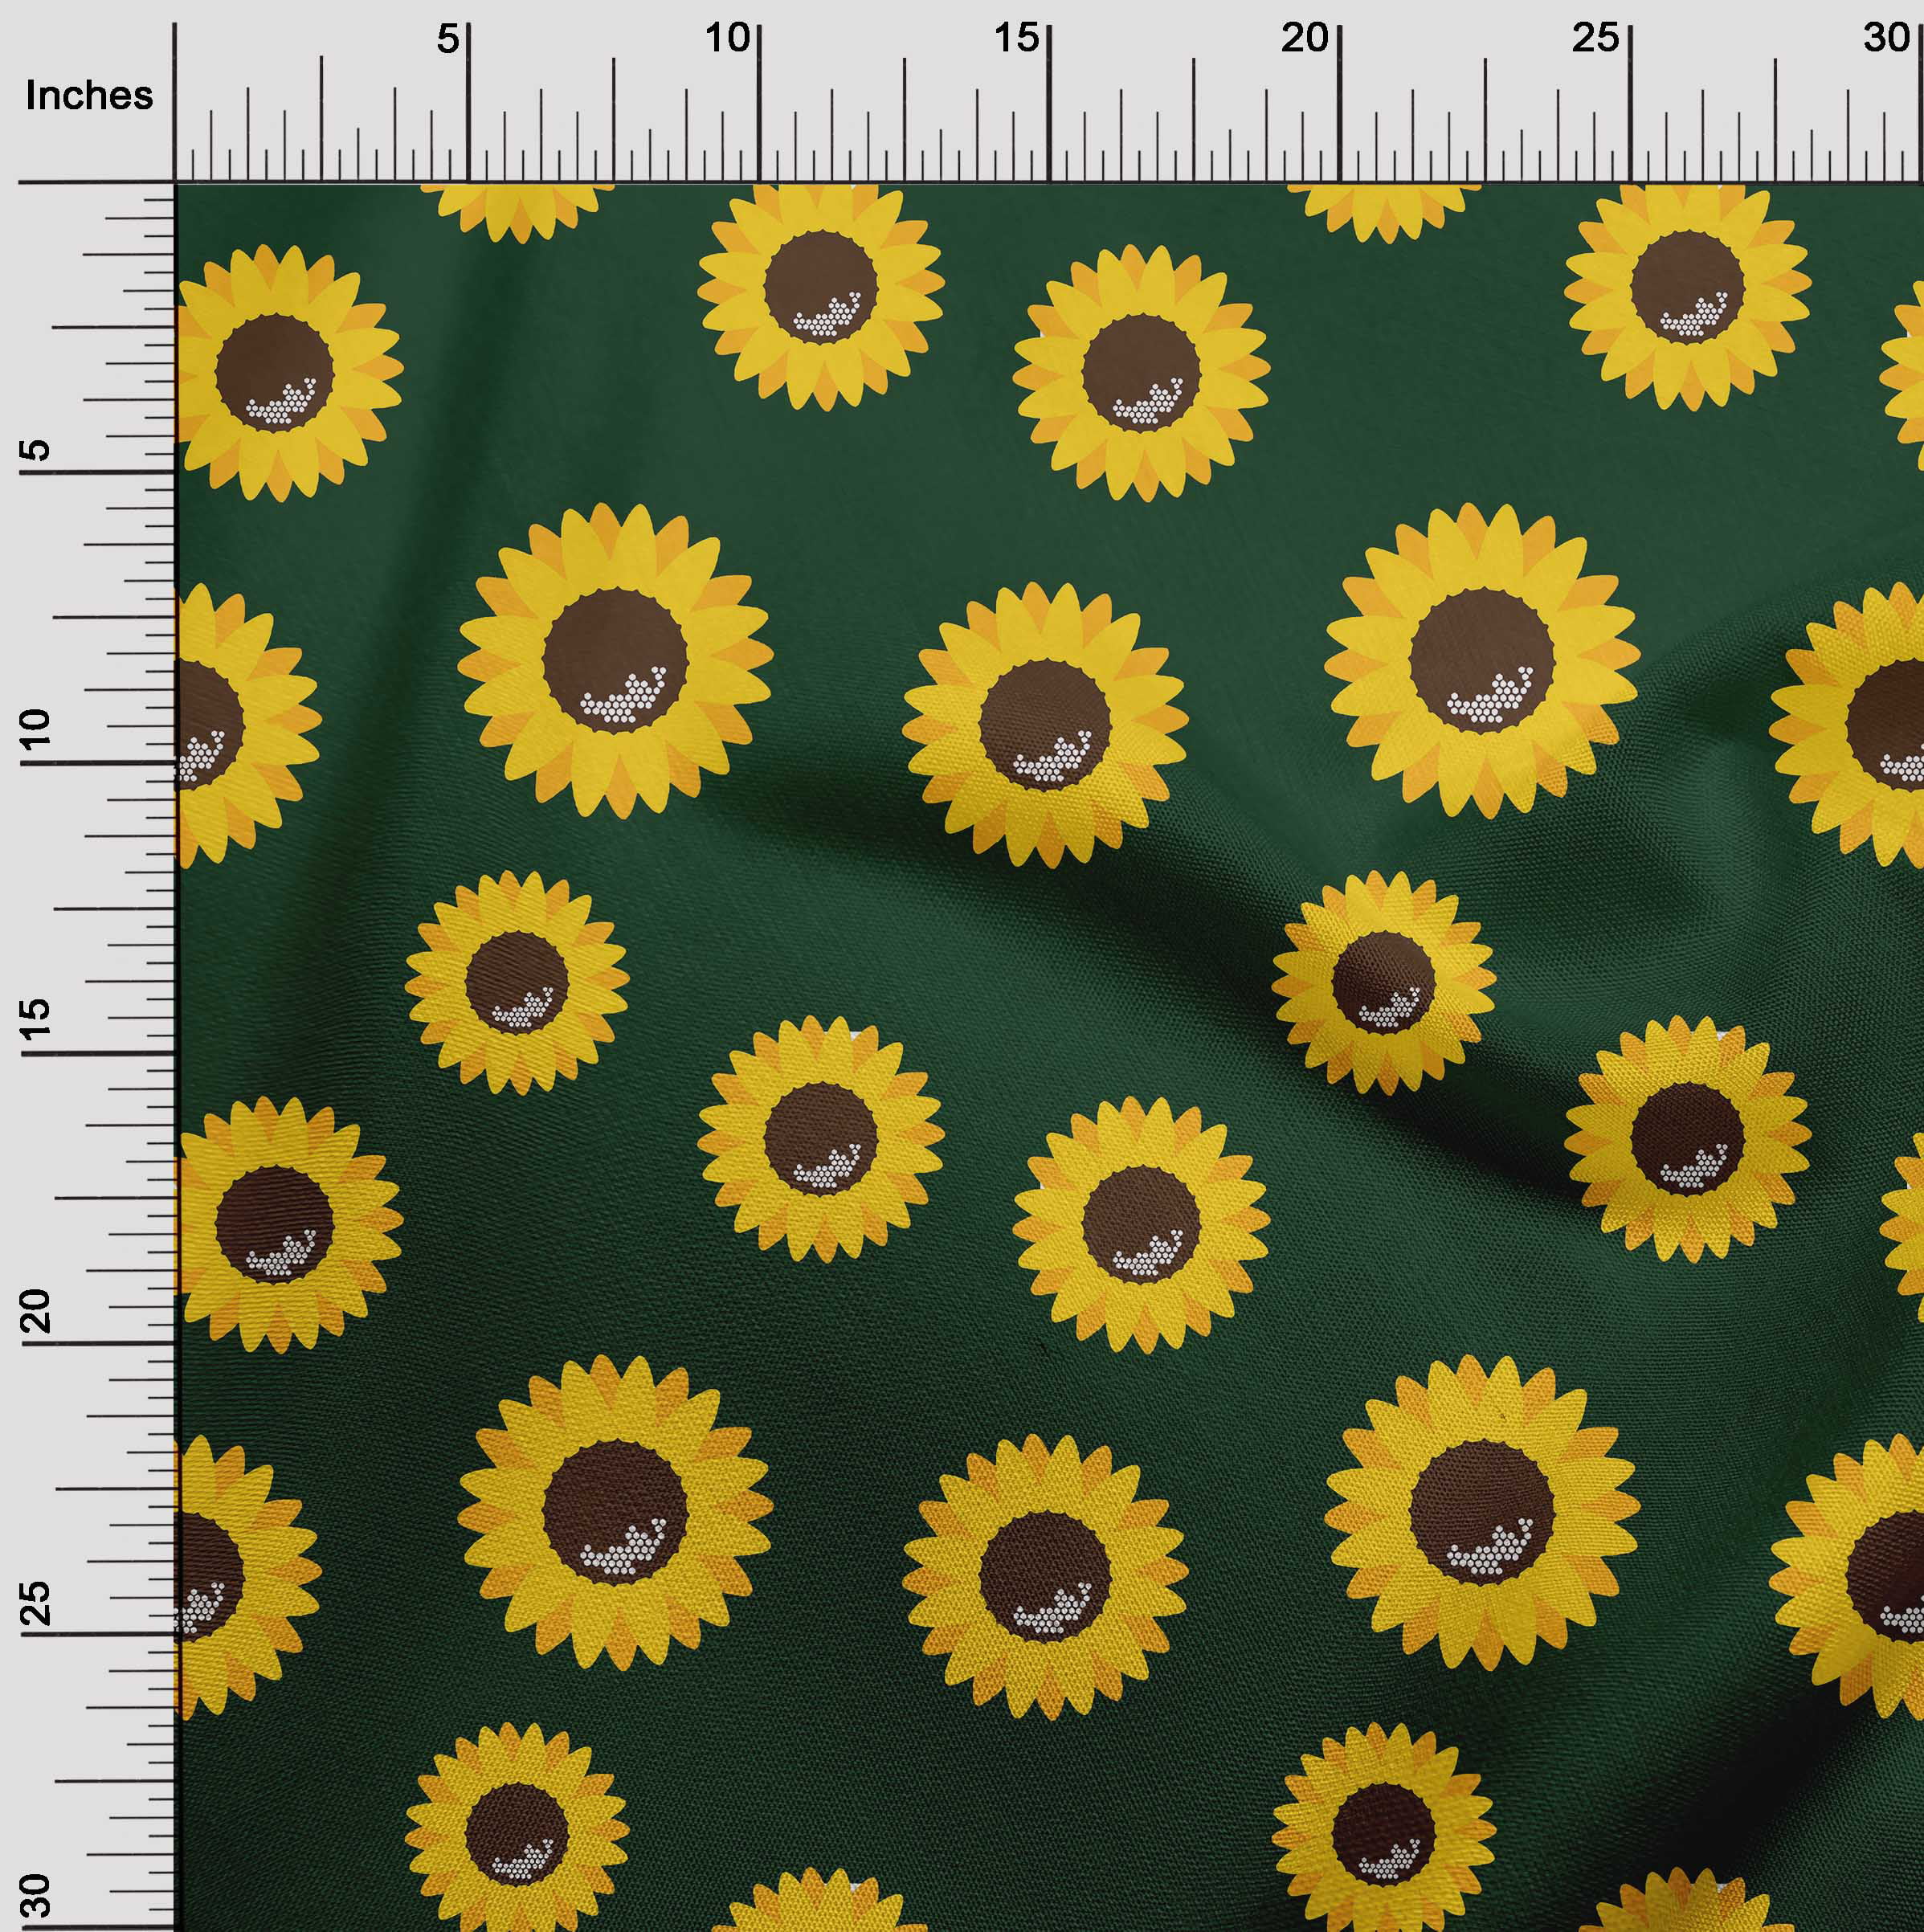 Likes 'n' Wants Sunflower Print Poly Cotton Fabric by The 5, 10, 15 and 20 Yard Increment, Size: 10 Yards